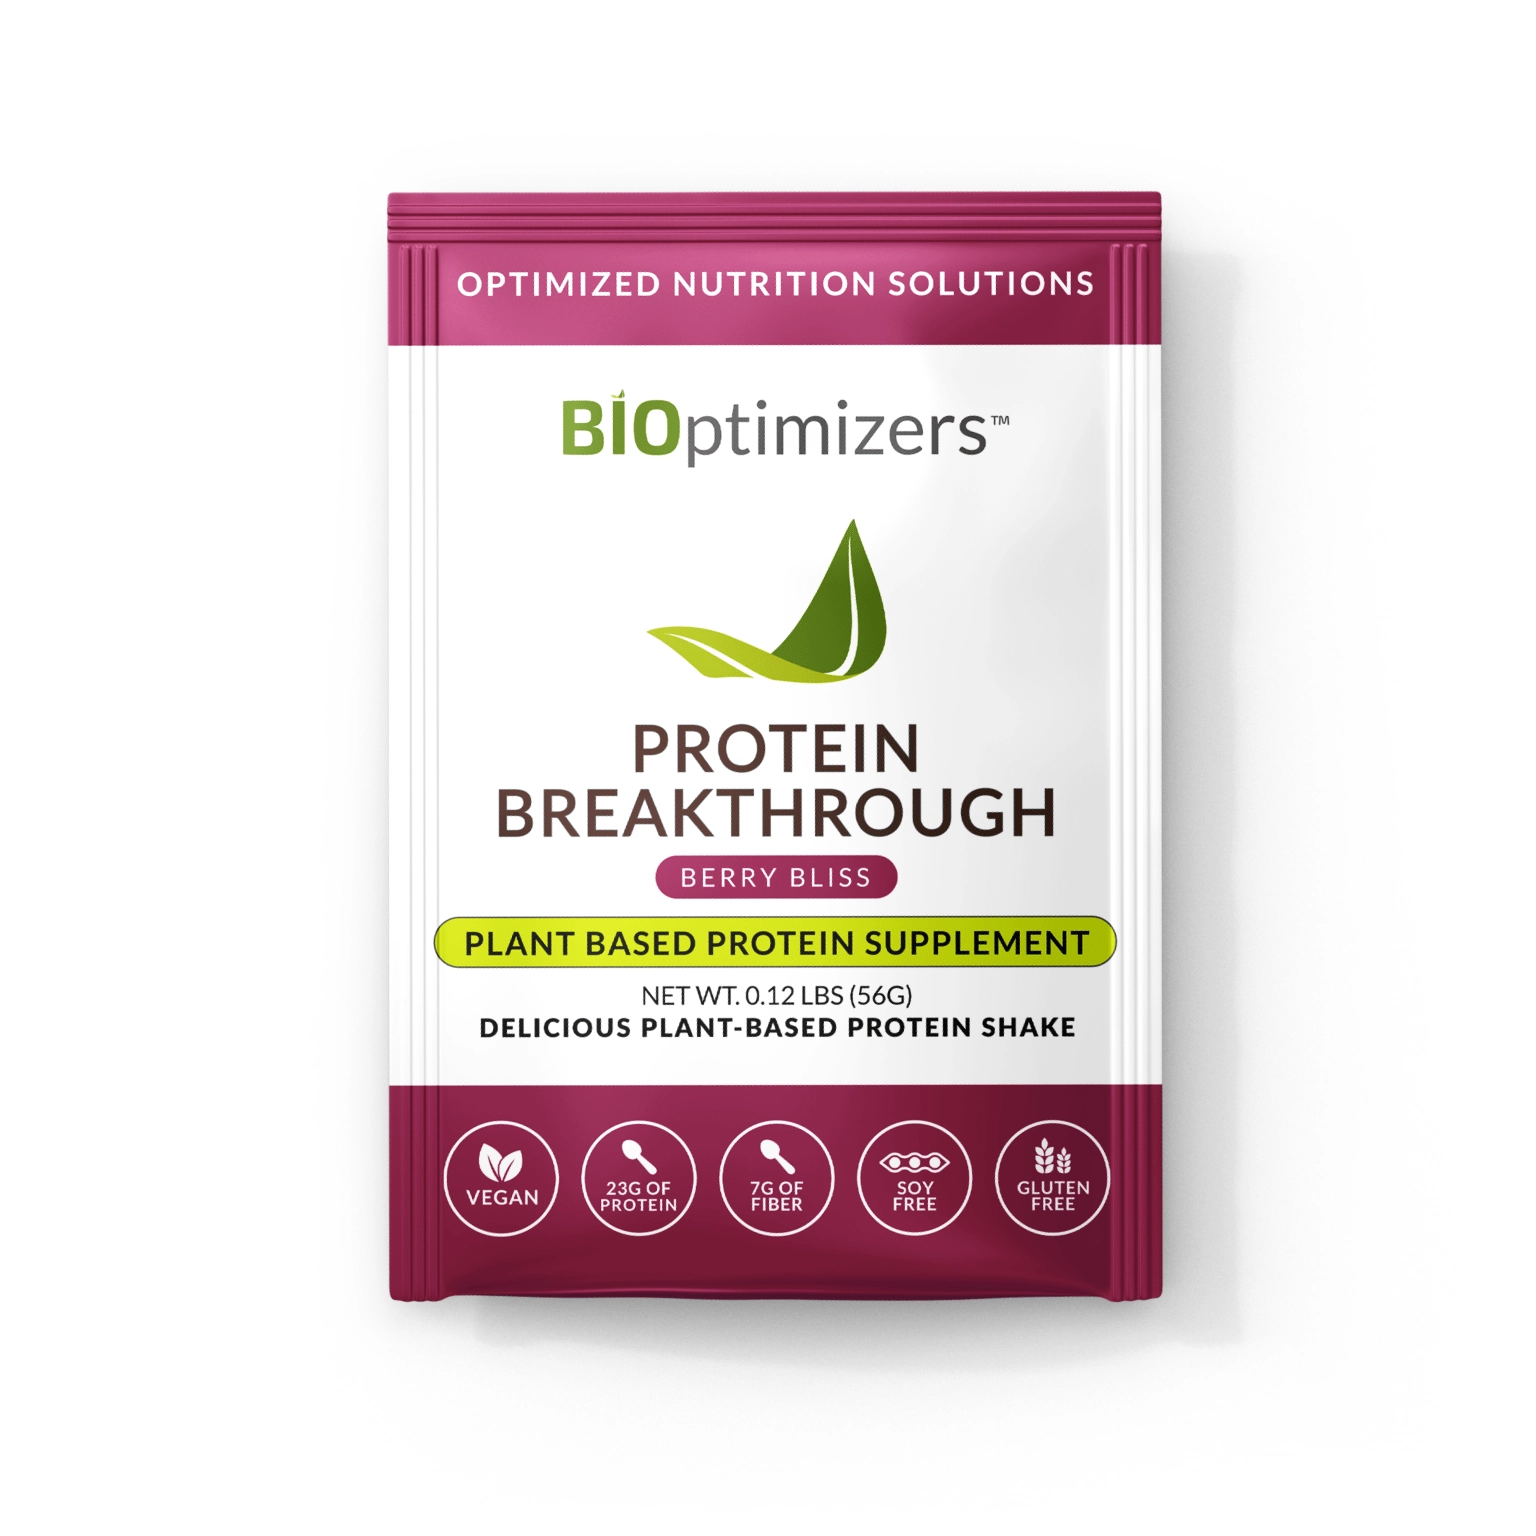 PROTEIN BREAKTHROUGH - BERRY BLISS (Travel Packets / 56g each)